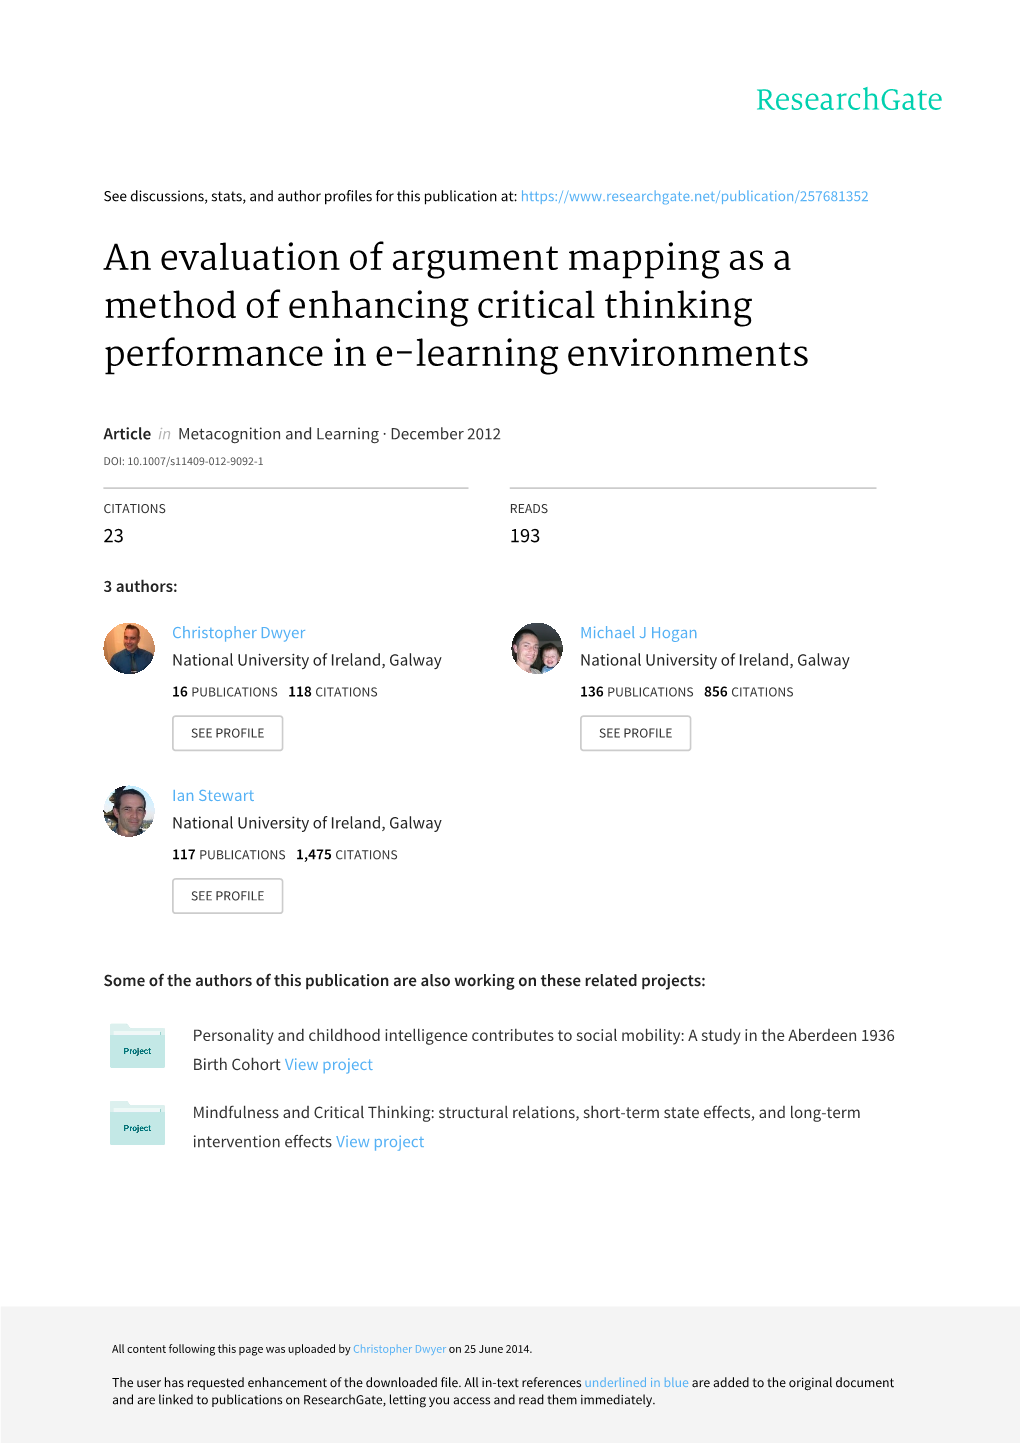 An Evaluation of Argument Mapping As a Method of Enhancing Critical Thinking Performance in E-Learning Environments